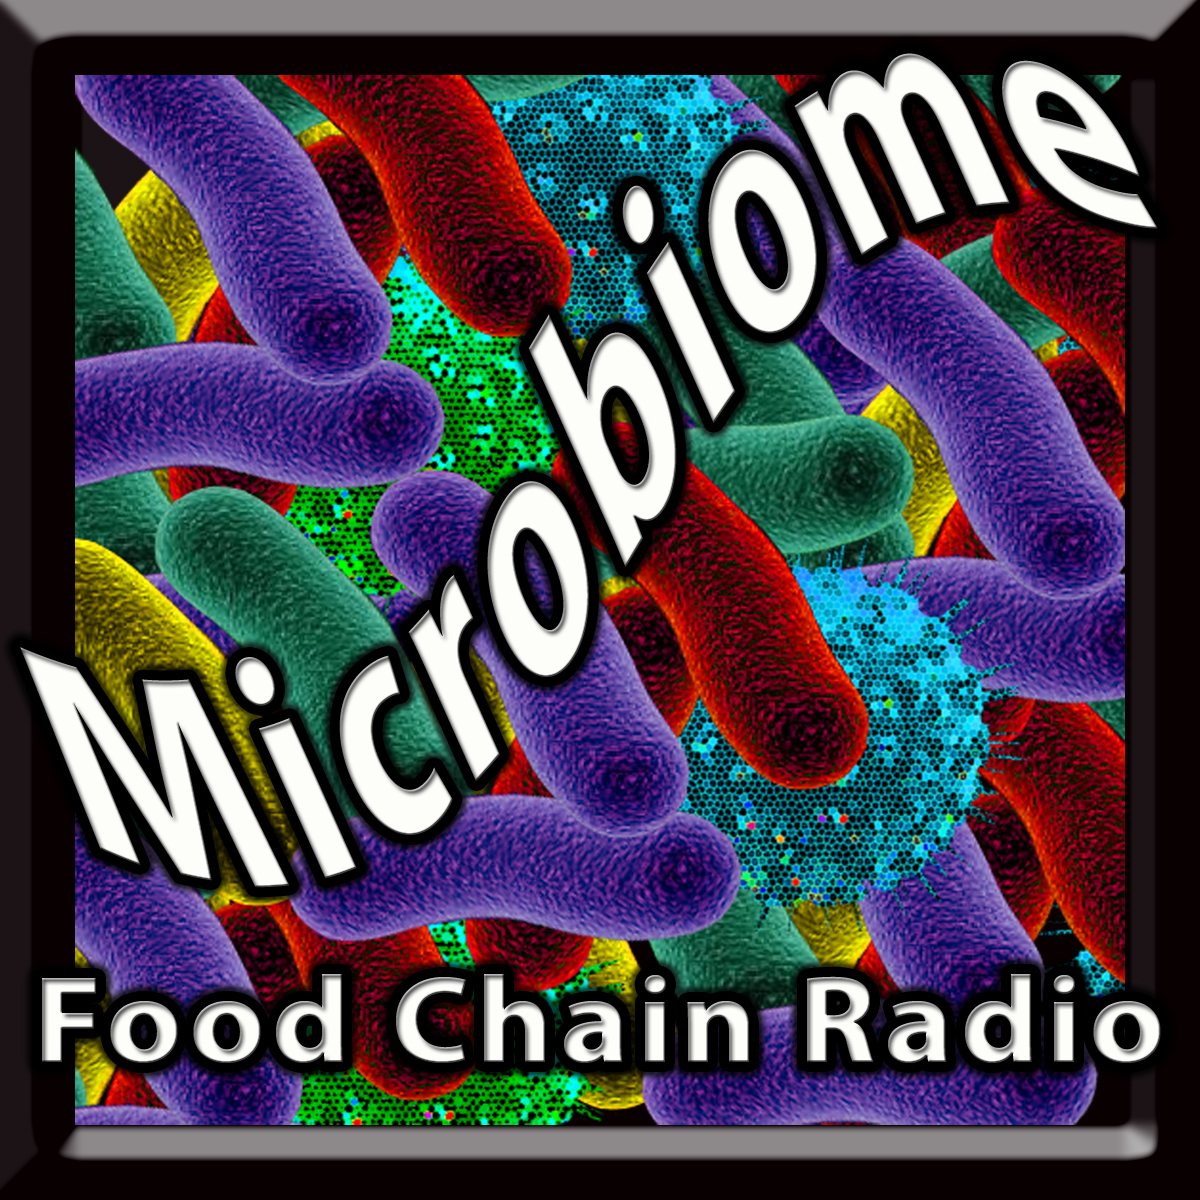 Michael Olson Food Chain Radio: Nutrition, Autism and the Microbiome